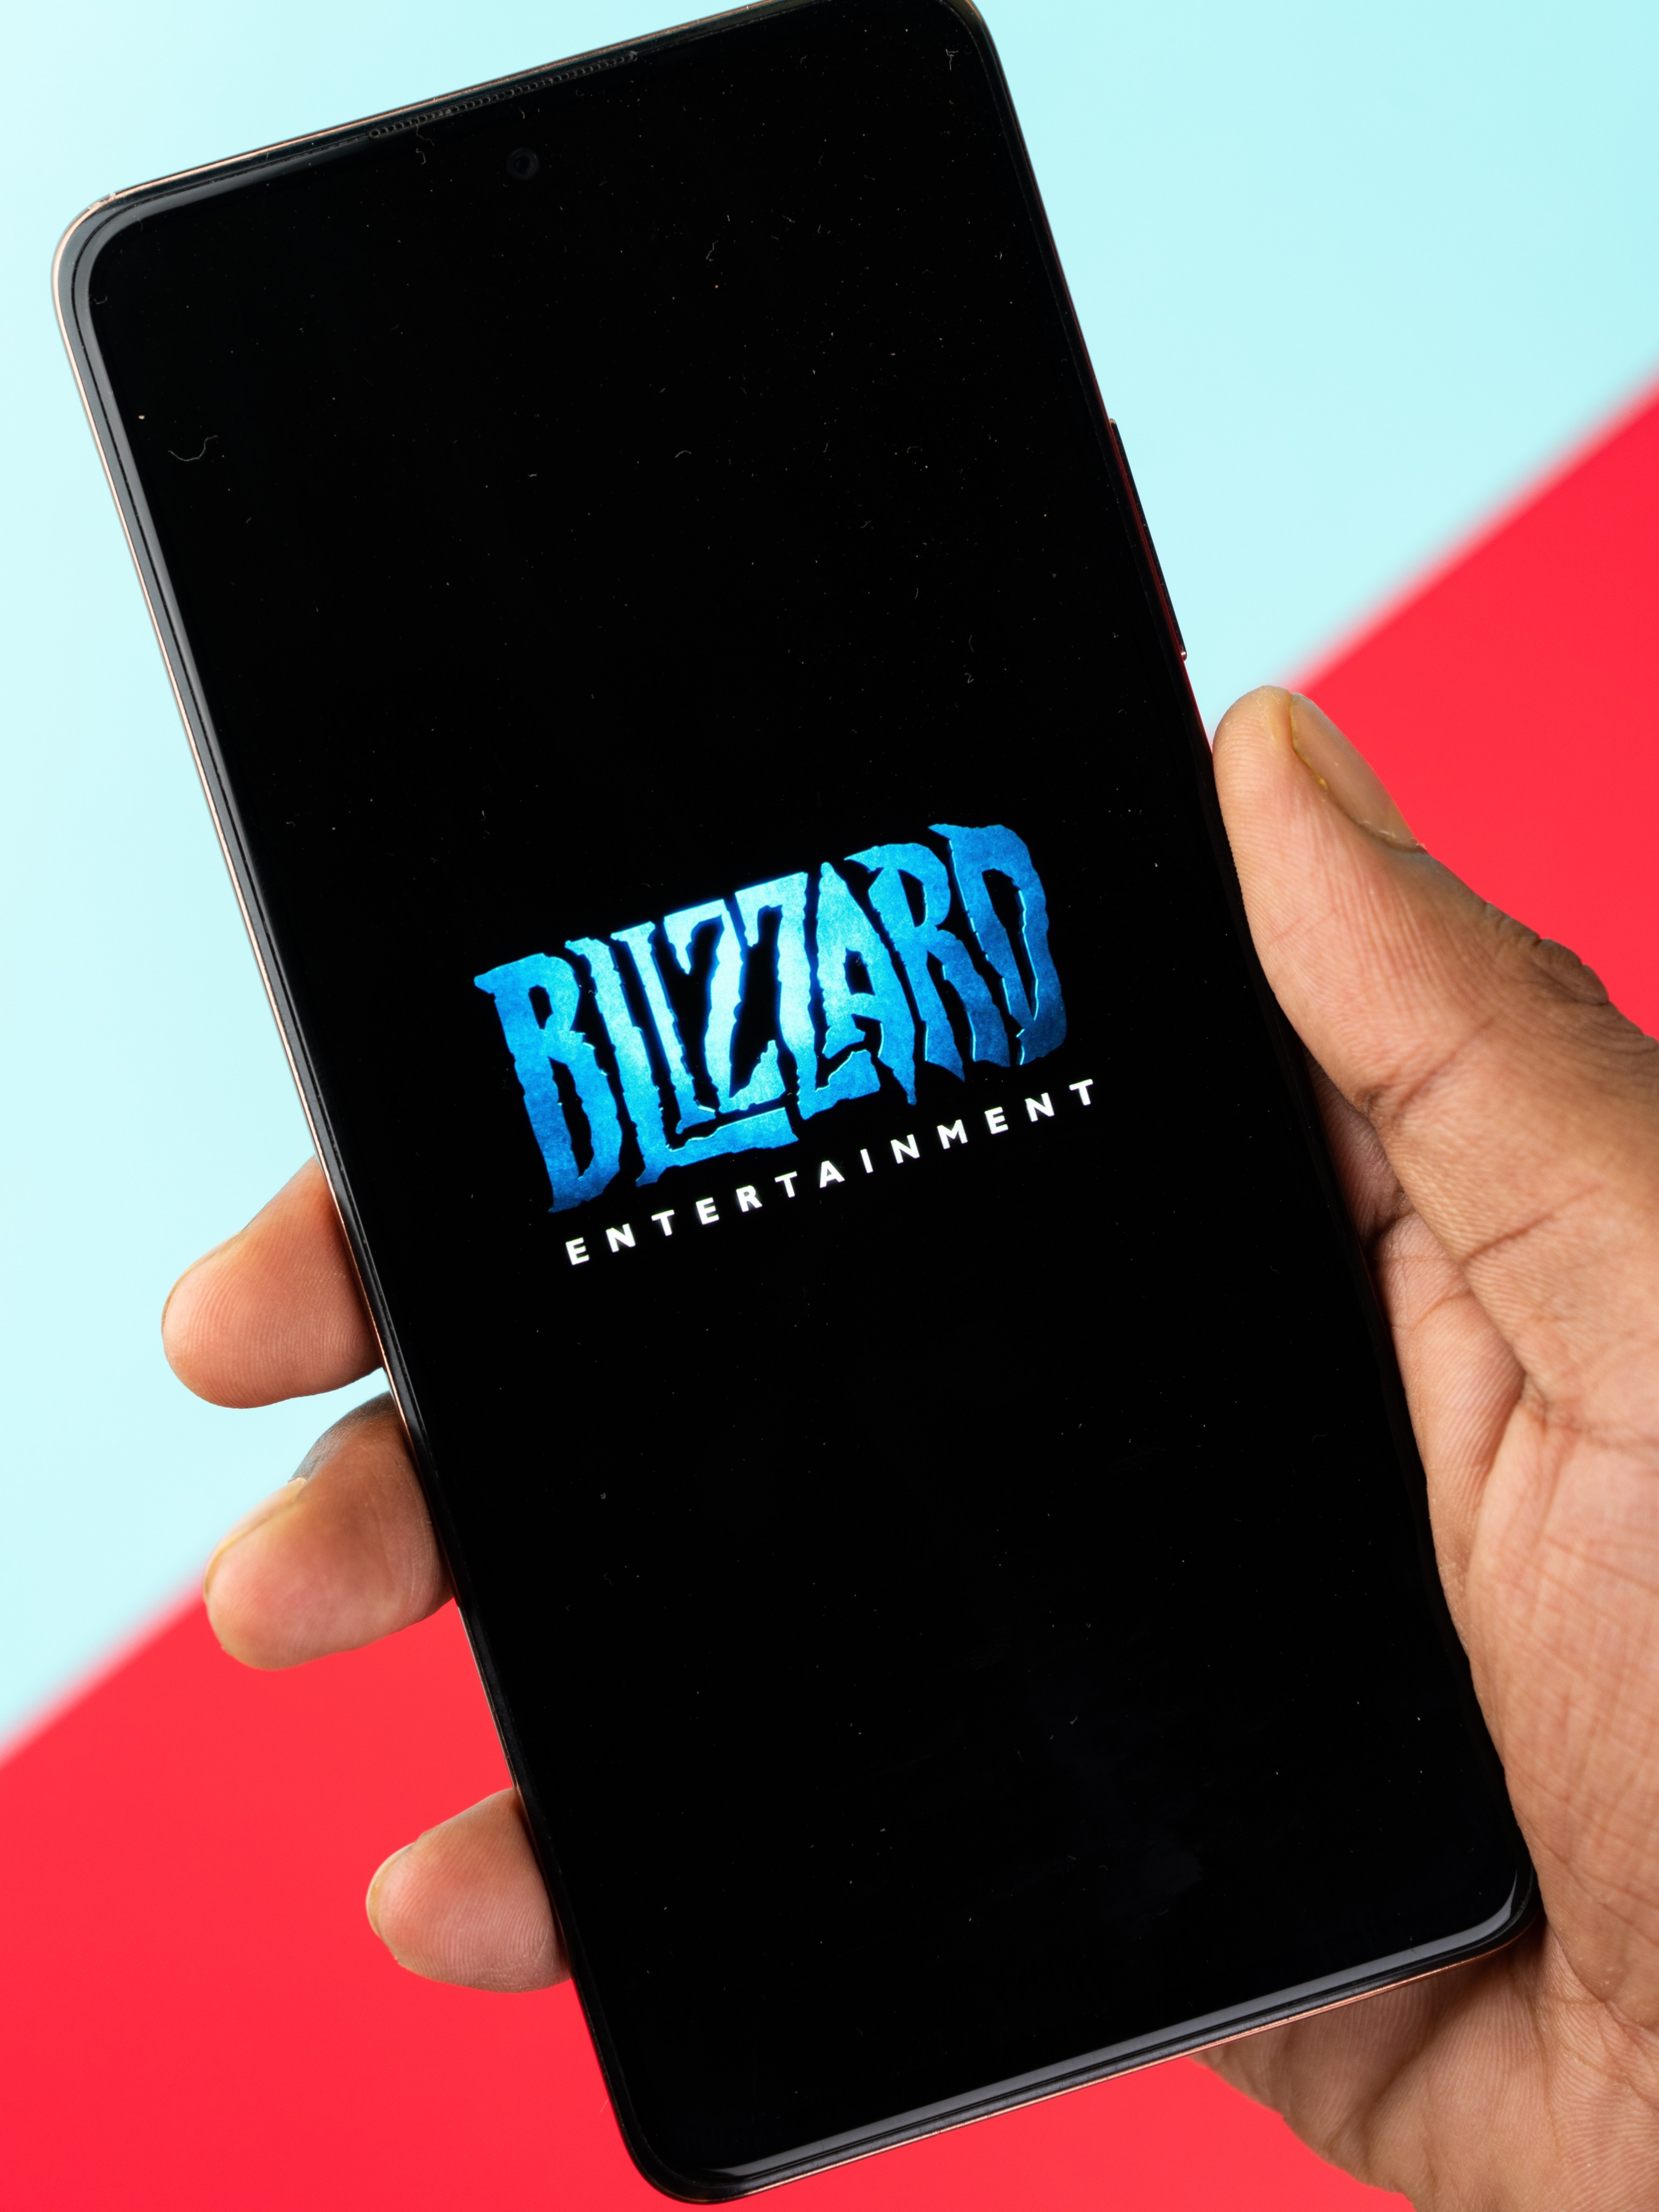 NetEase is dissolving the Shanghai-based team responsible for operating titles licensed from US game publisher Blizzard Entertainment, according to sources. Photo: Shutterstock